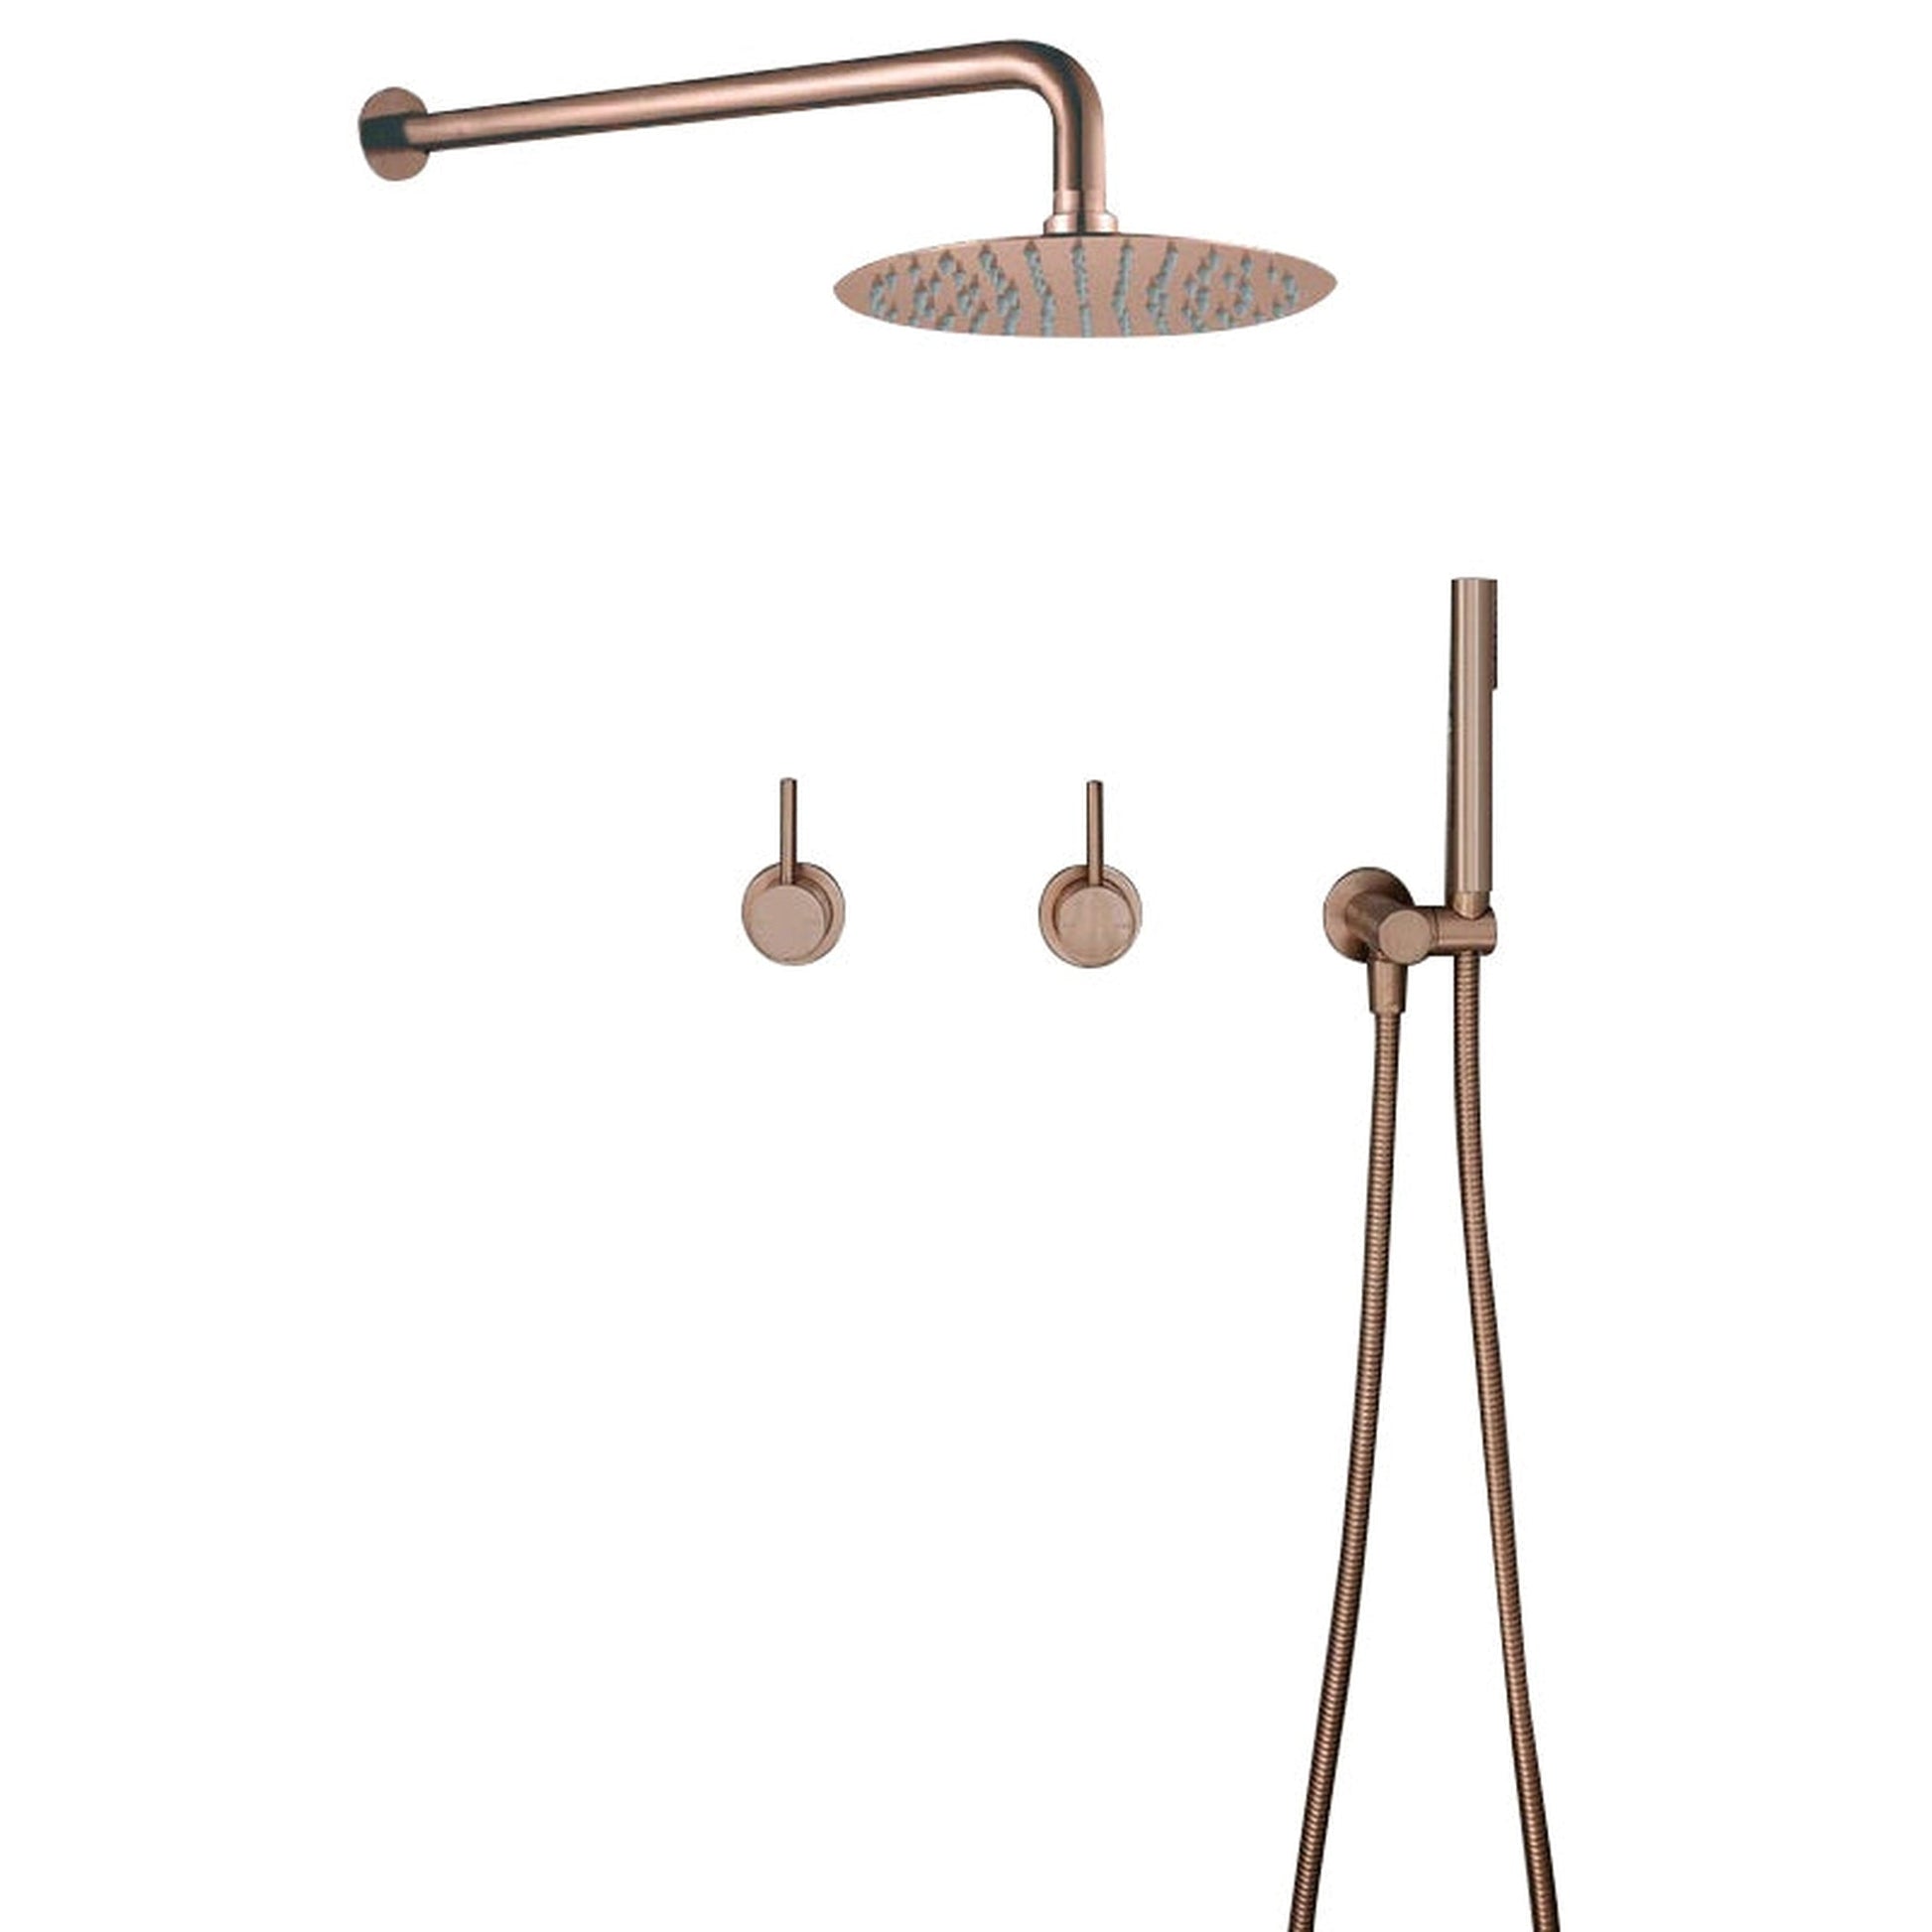 https://usbathstore.com/cdn/shop/files/FontanaShowers-Verona-Creative-Luxury-Rose-Gold-Round-Wall-Mounted-Solid-Brass-Shower-Head-Rainfall-Shower-System-With-Dual-Mixer-and-Hand-Shower.jpg?v=1683630720&width=1946